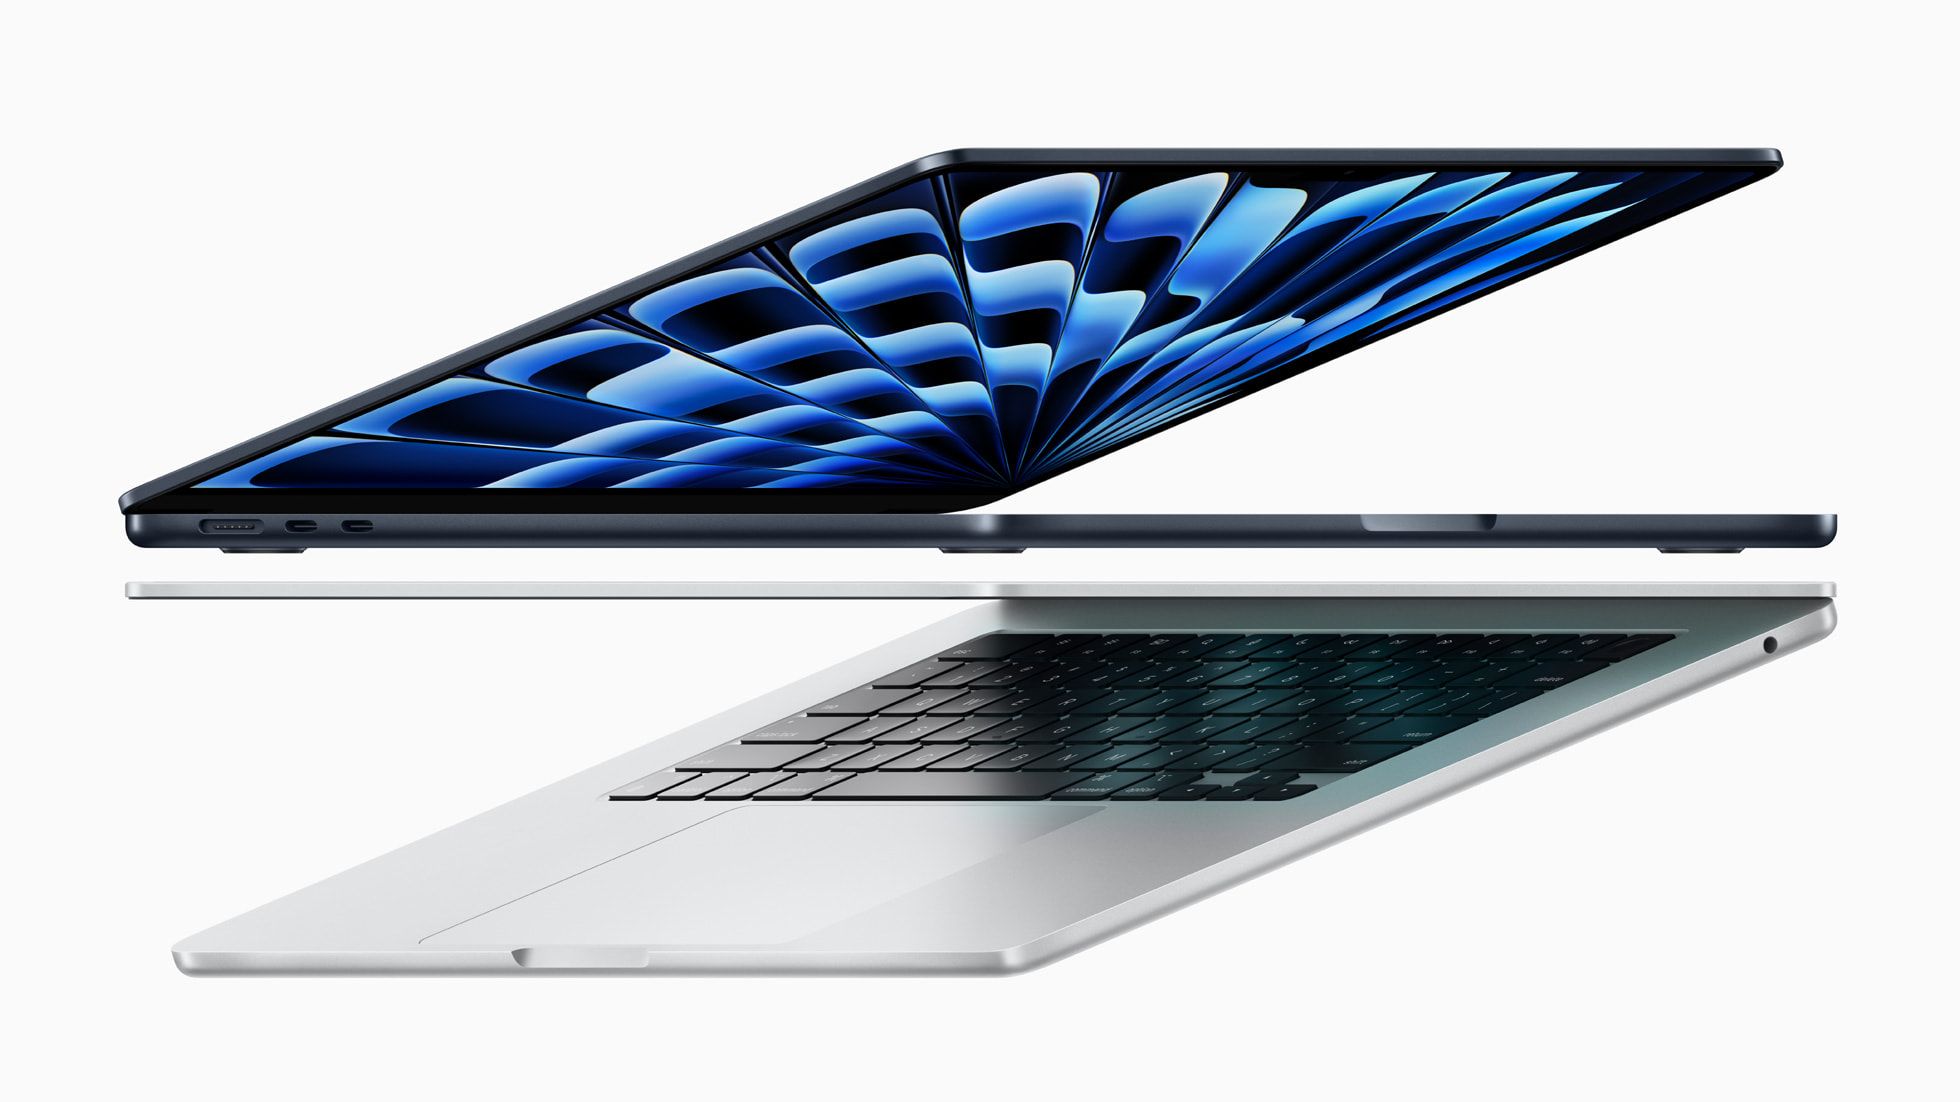 Apple’s new M3-powered MacBook Air models are here with more power and support for two external displays